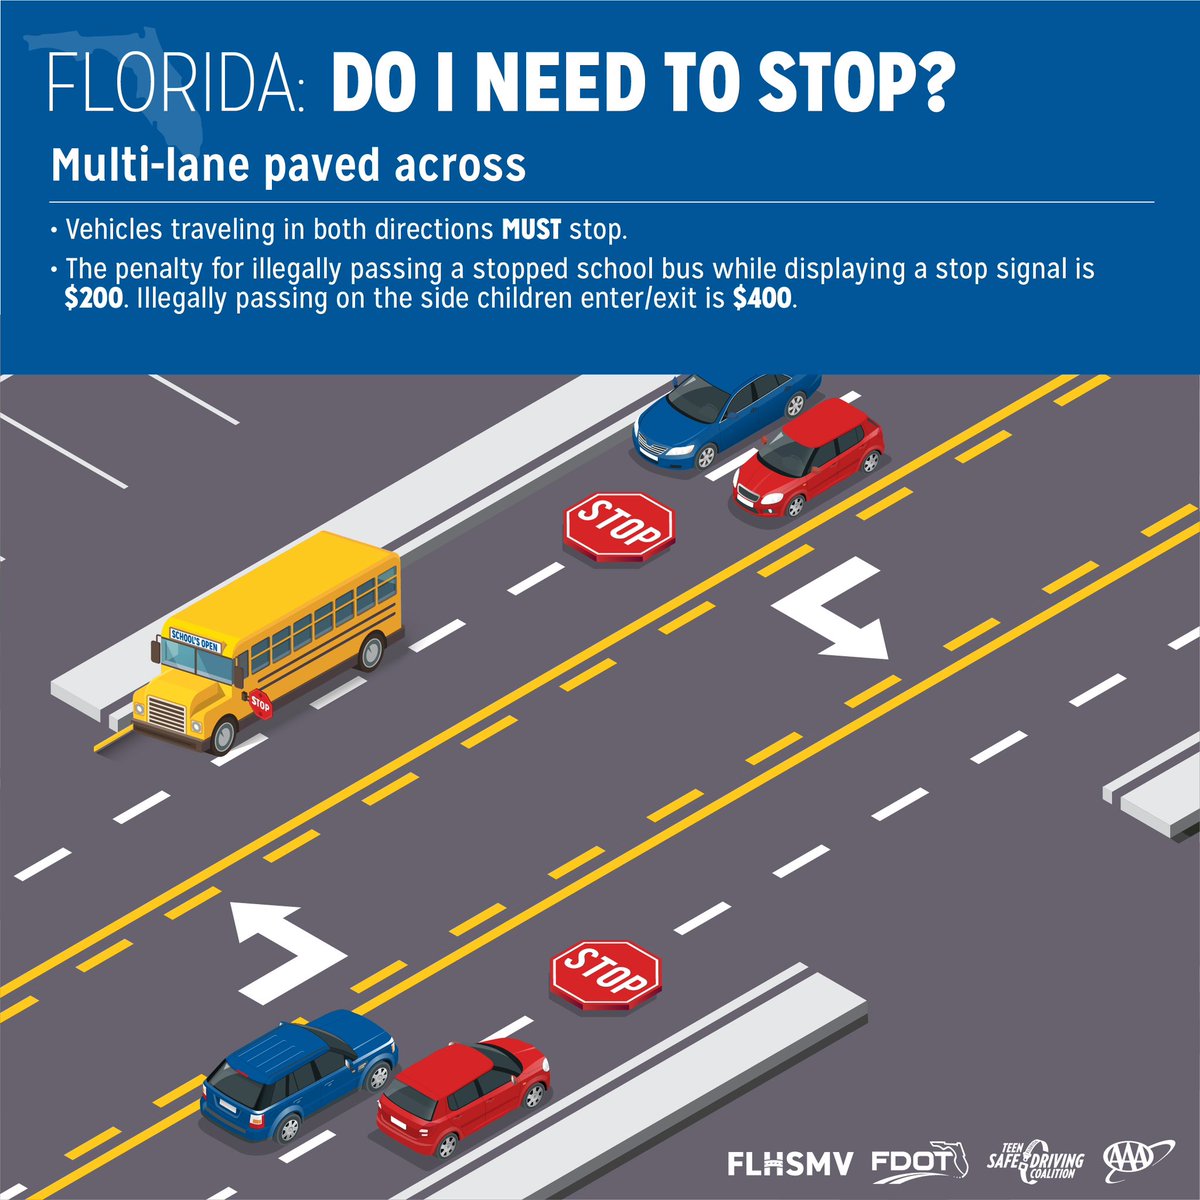 Do you know when to stop for a school bus? Keep students, and yourself, safe by following all school bus safety laws! Safety is a shared responsibility.